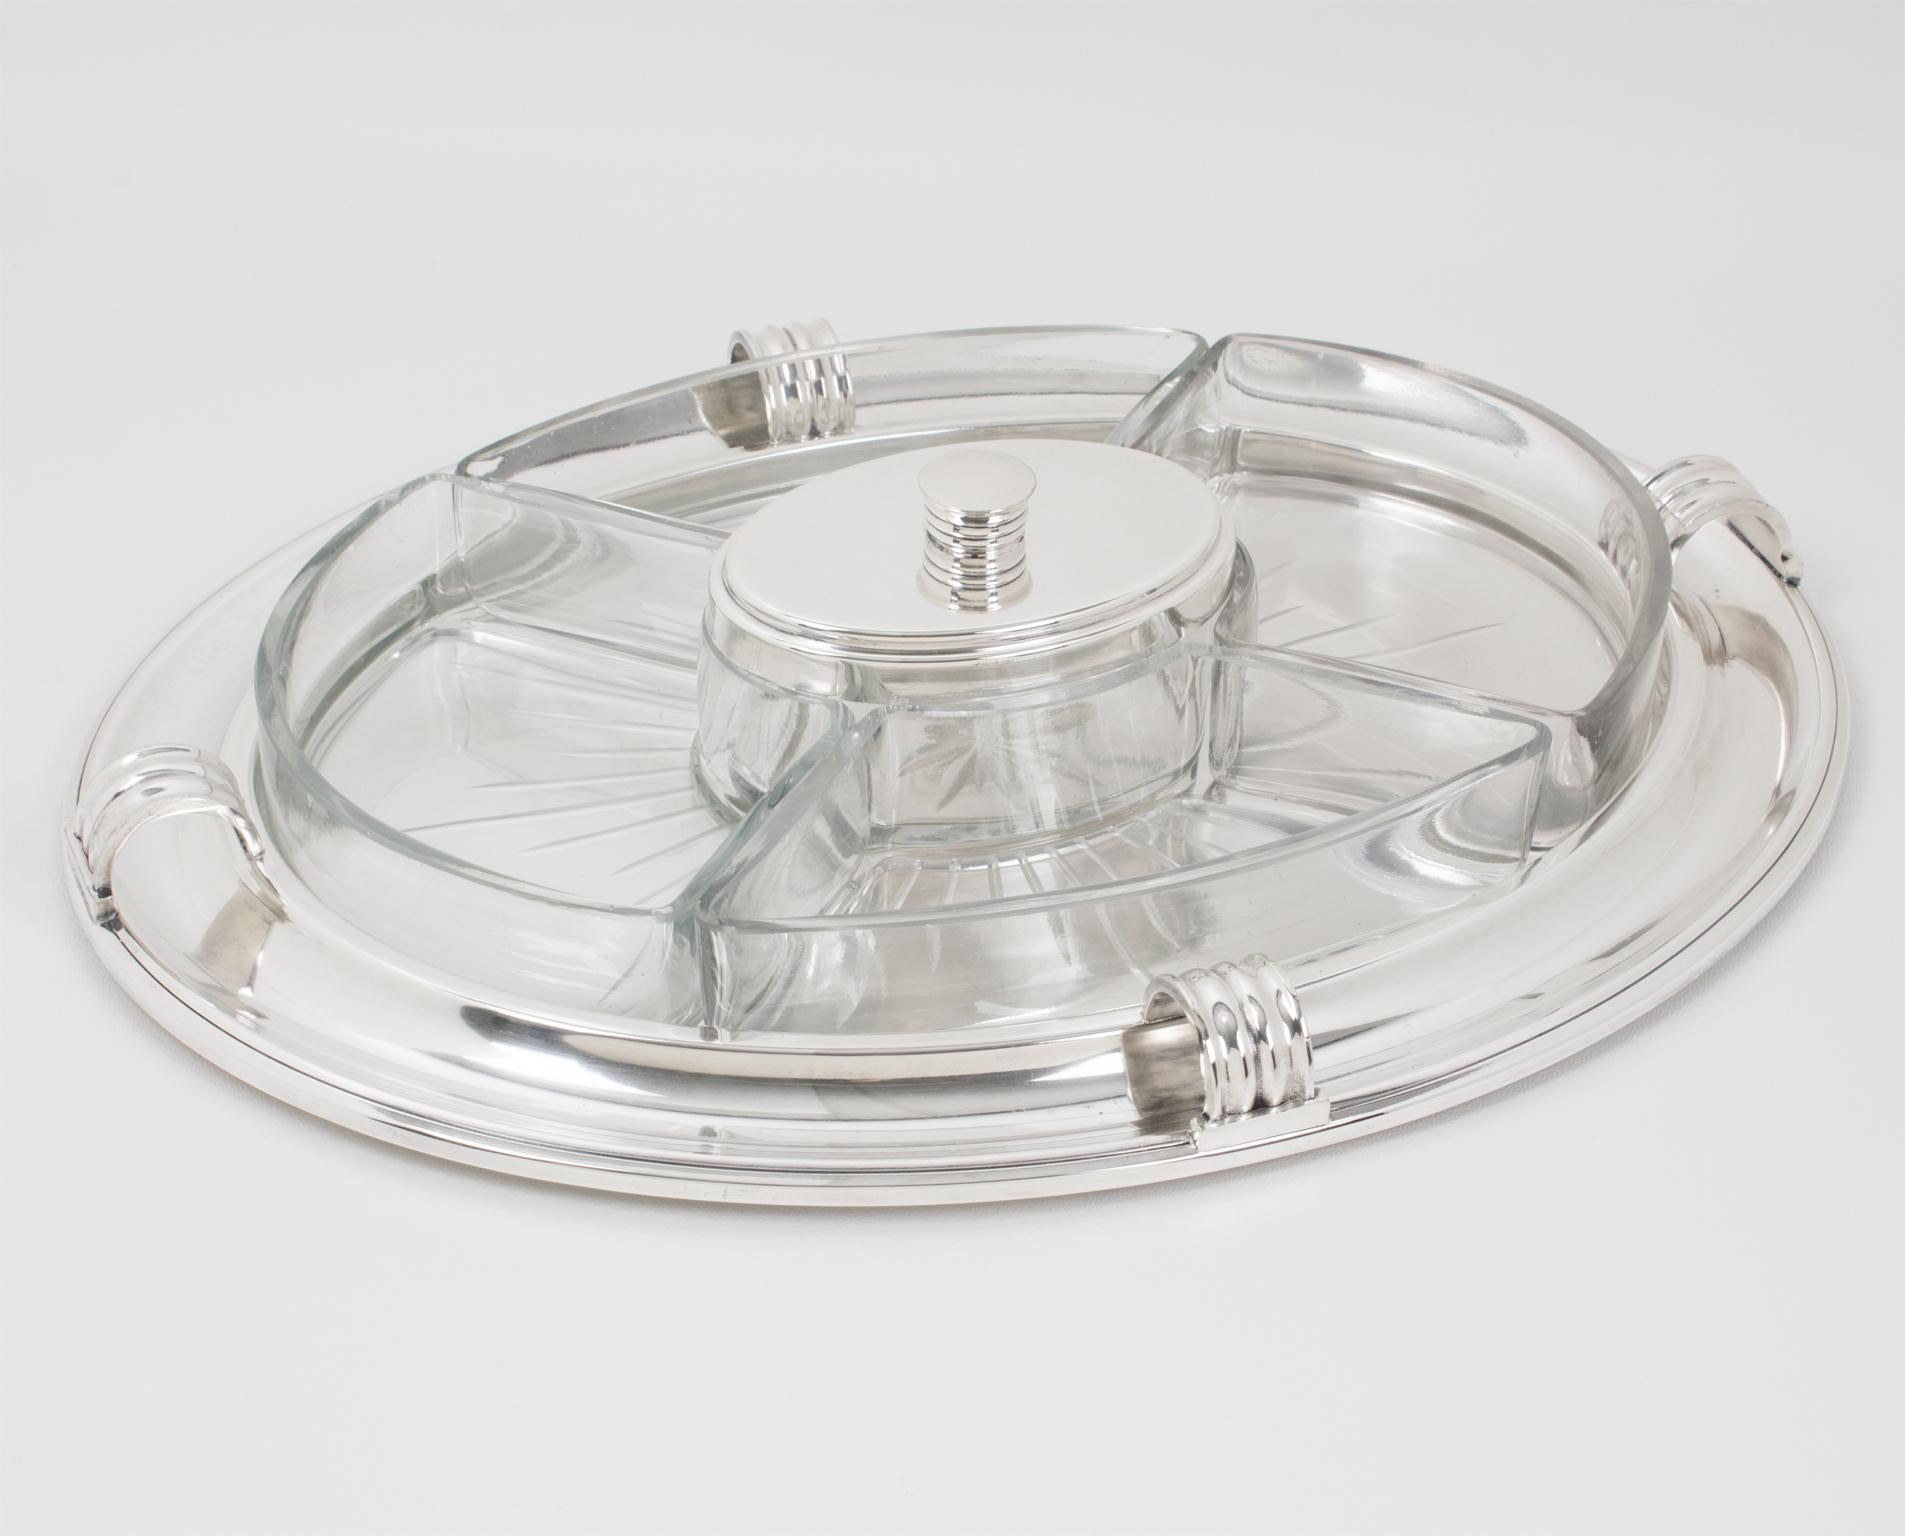 French silversmith Christofle designed this elegant Art Deco barware serving set for cocktails or appetizers for its Gallia collection in the 1930s. The hors d'oeuvres platter dish features a large oval silver plate serving tray with carved ribbed